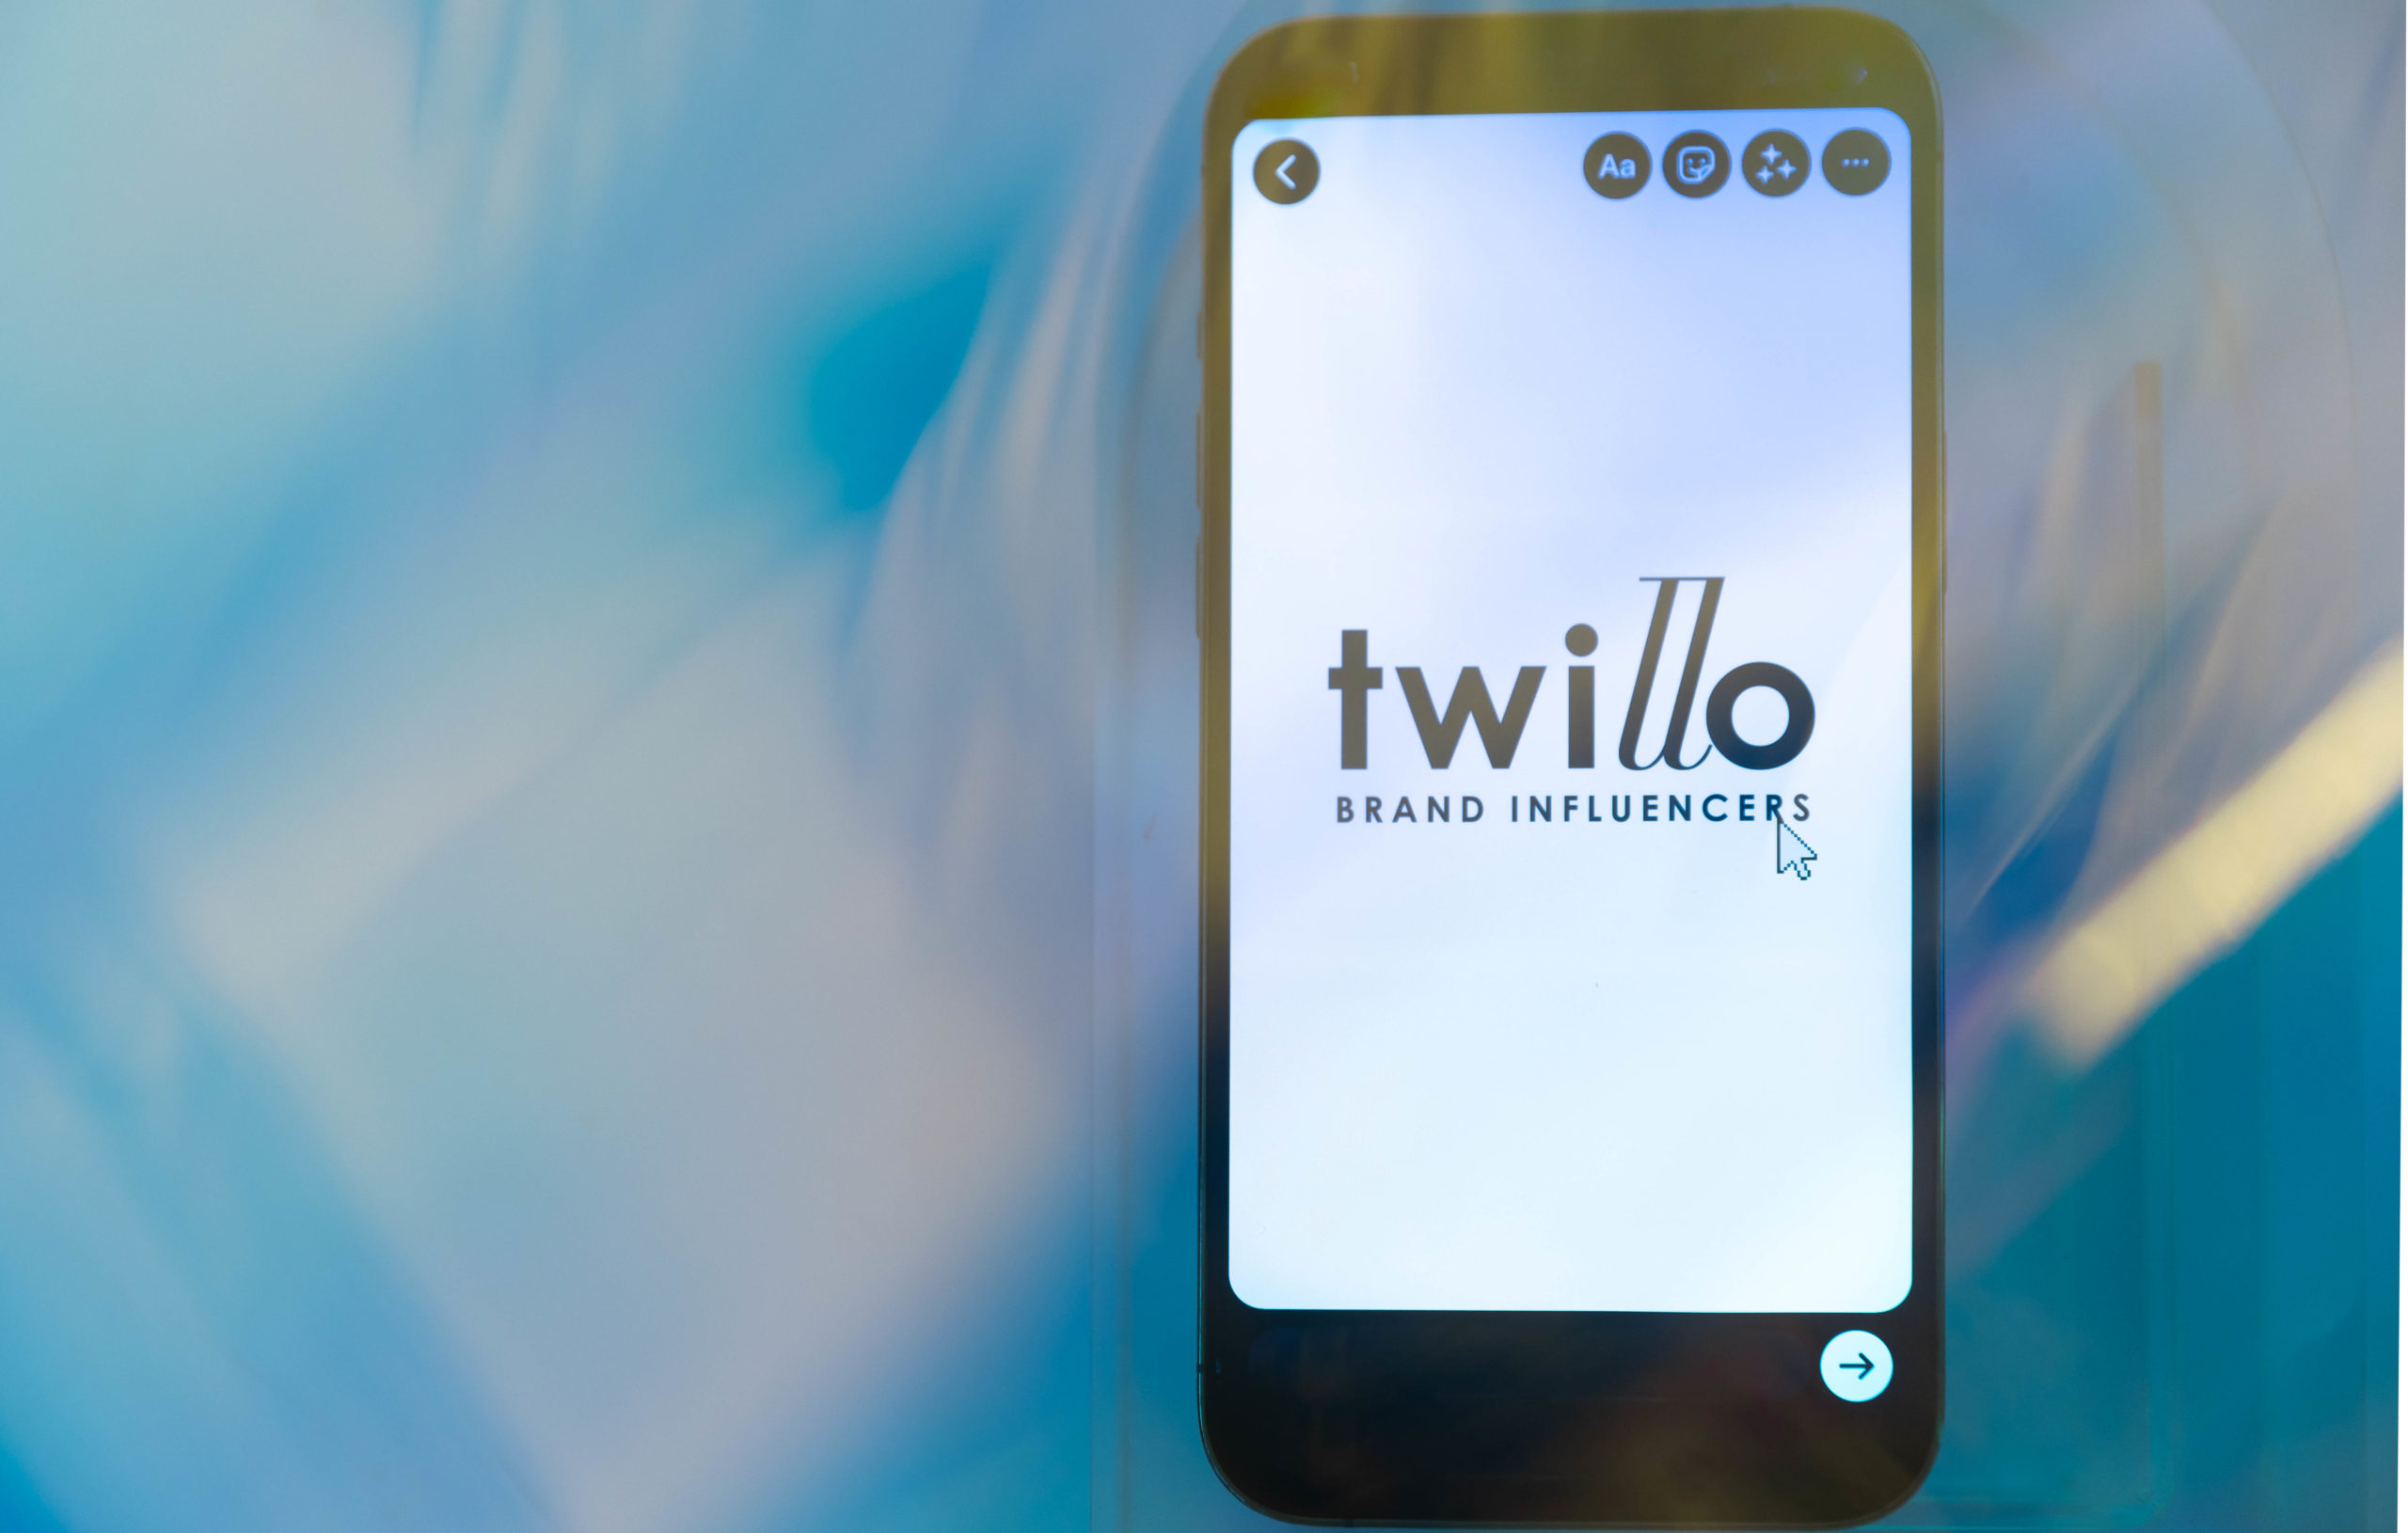 Twillo Brand Influencers_Featured